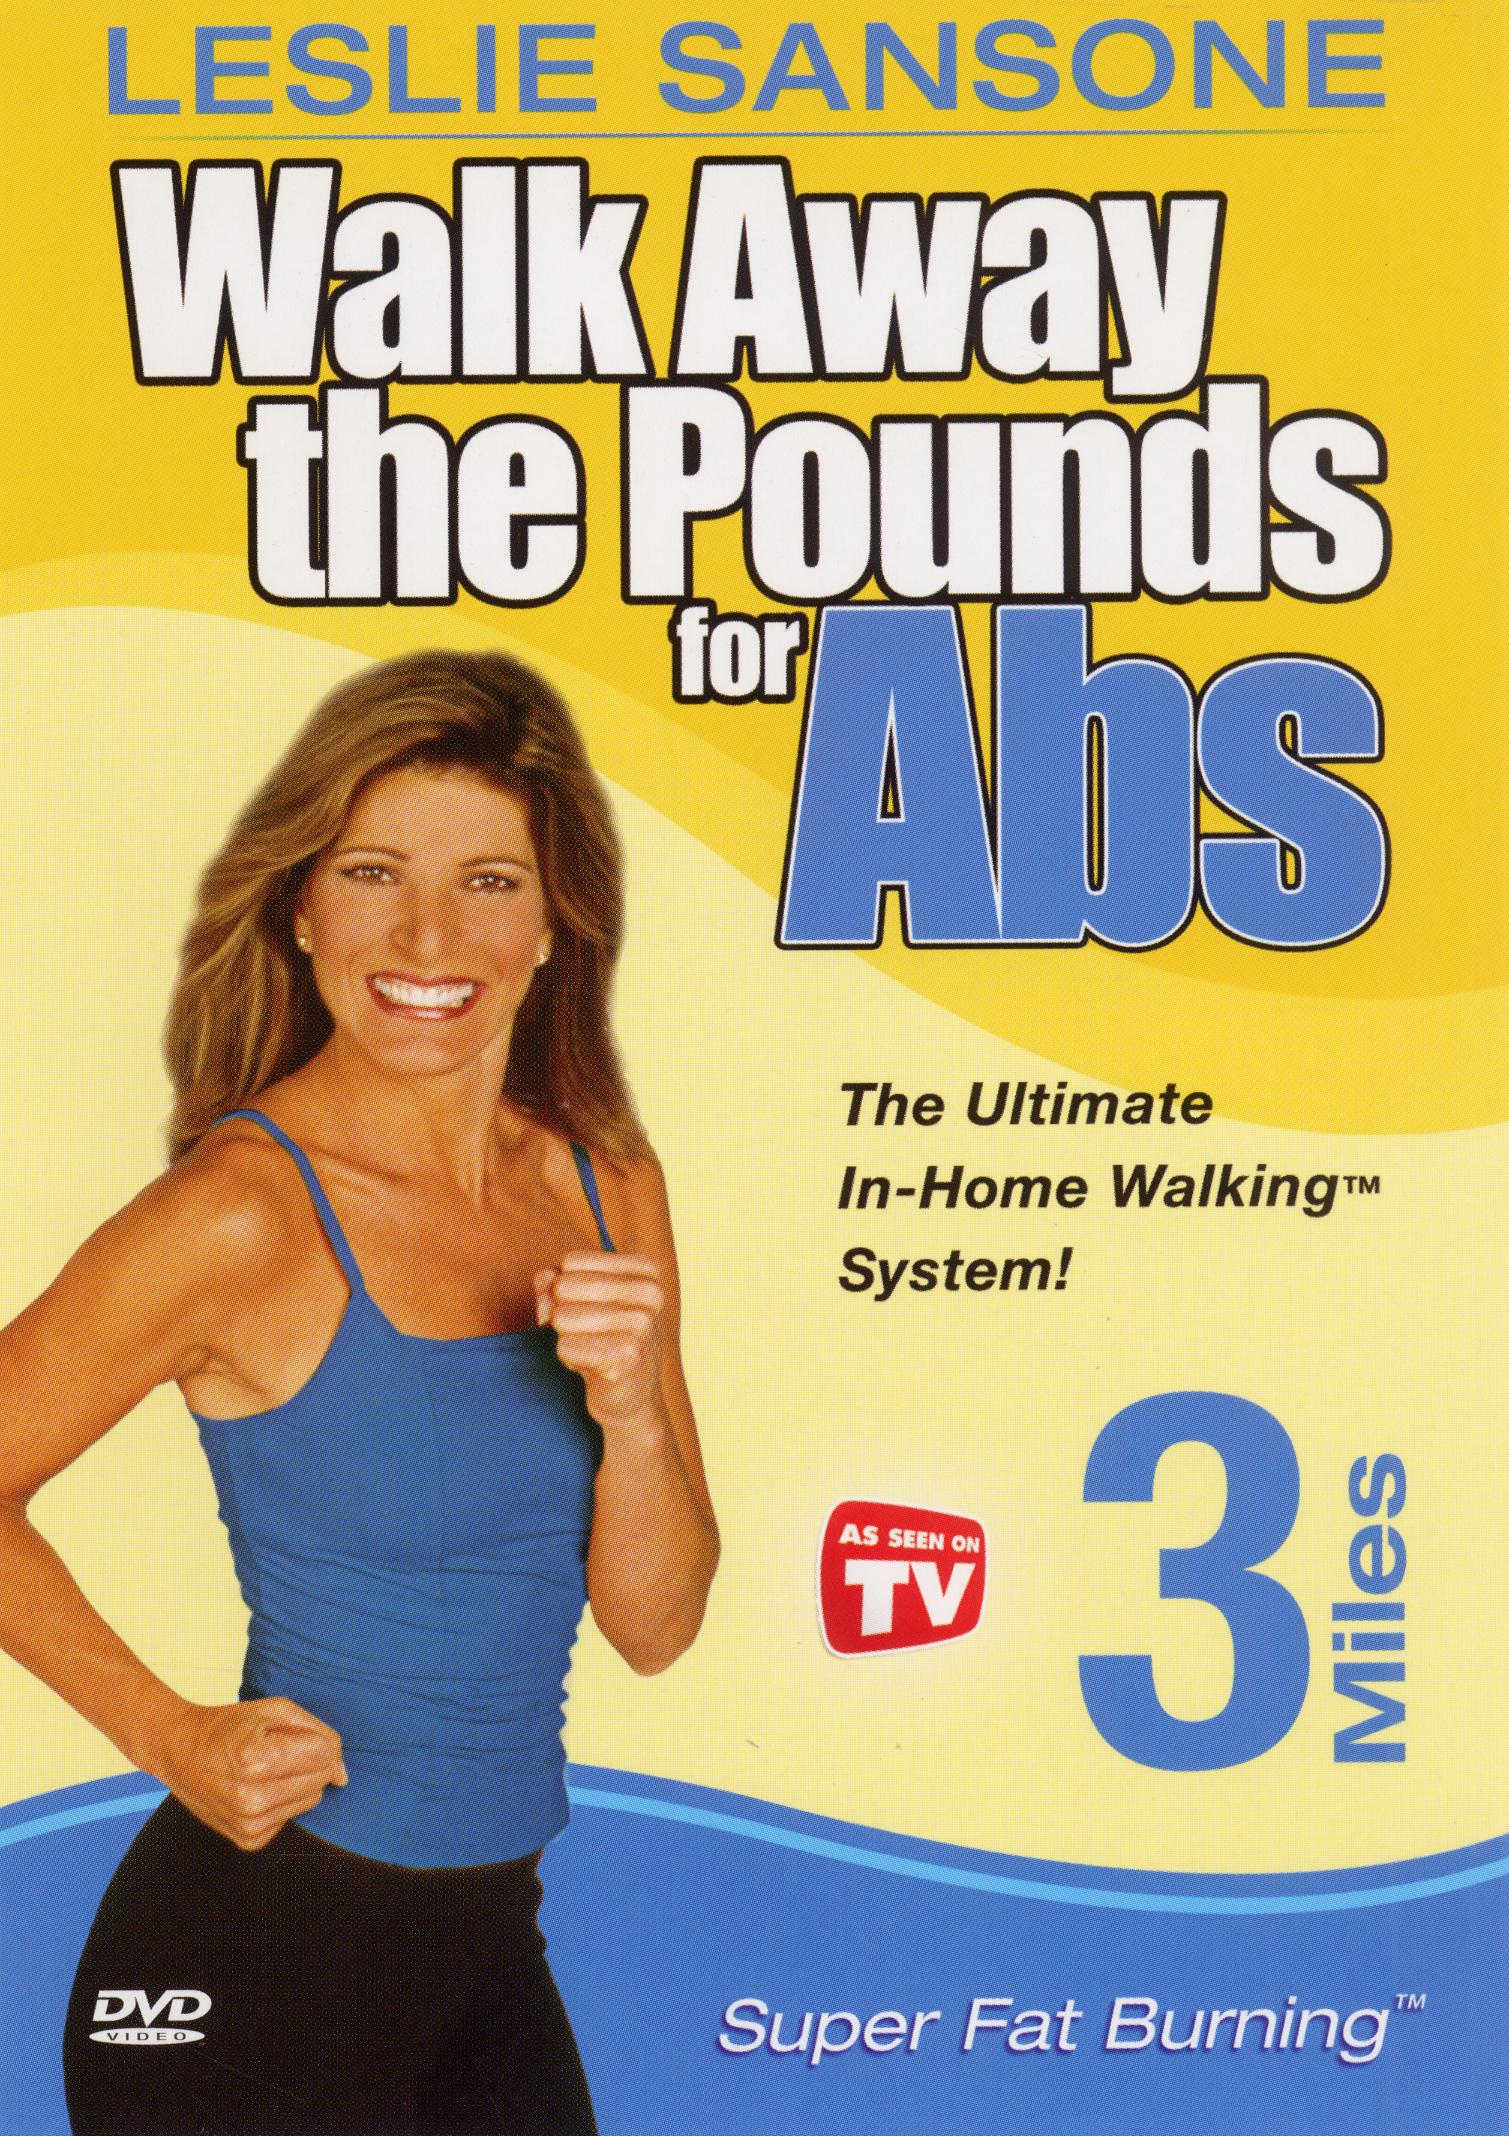 Leslie Sansone: Walk Away the Pounds for Abs - 3 Miles - | Data ...